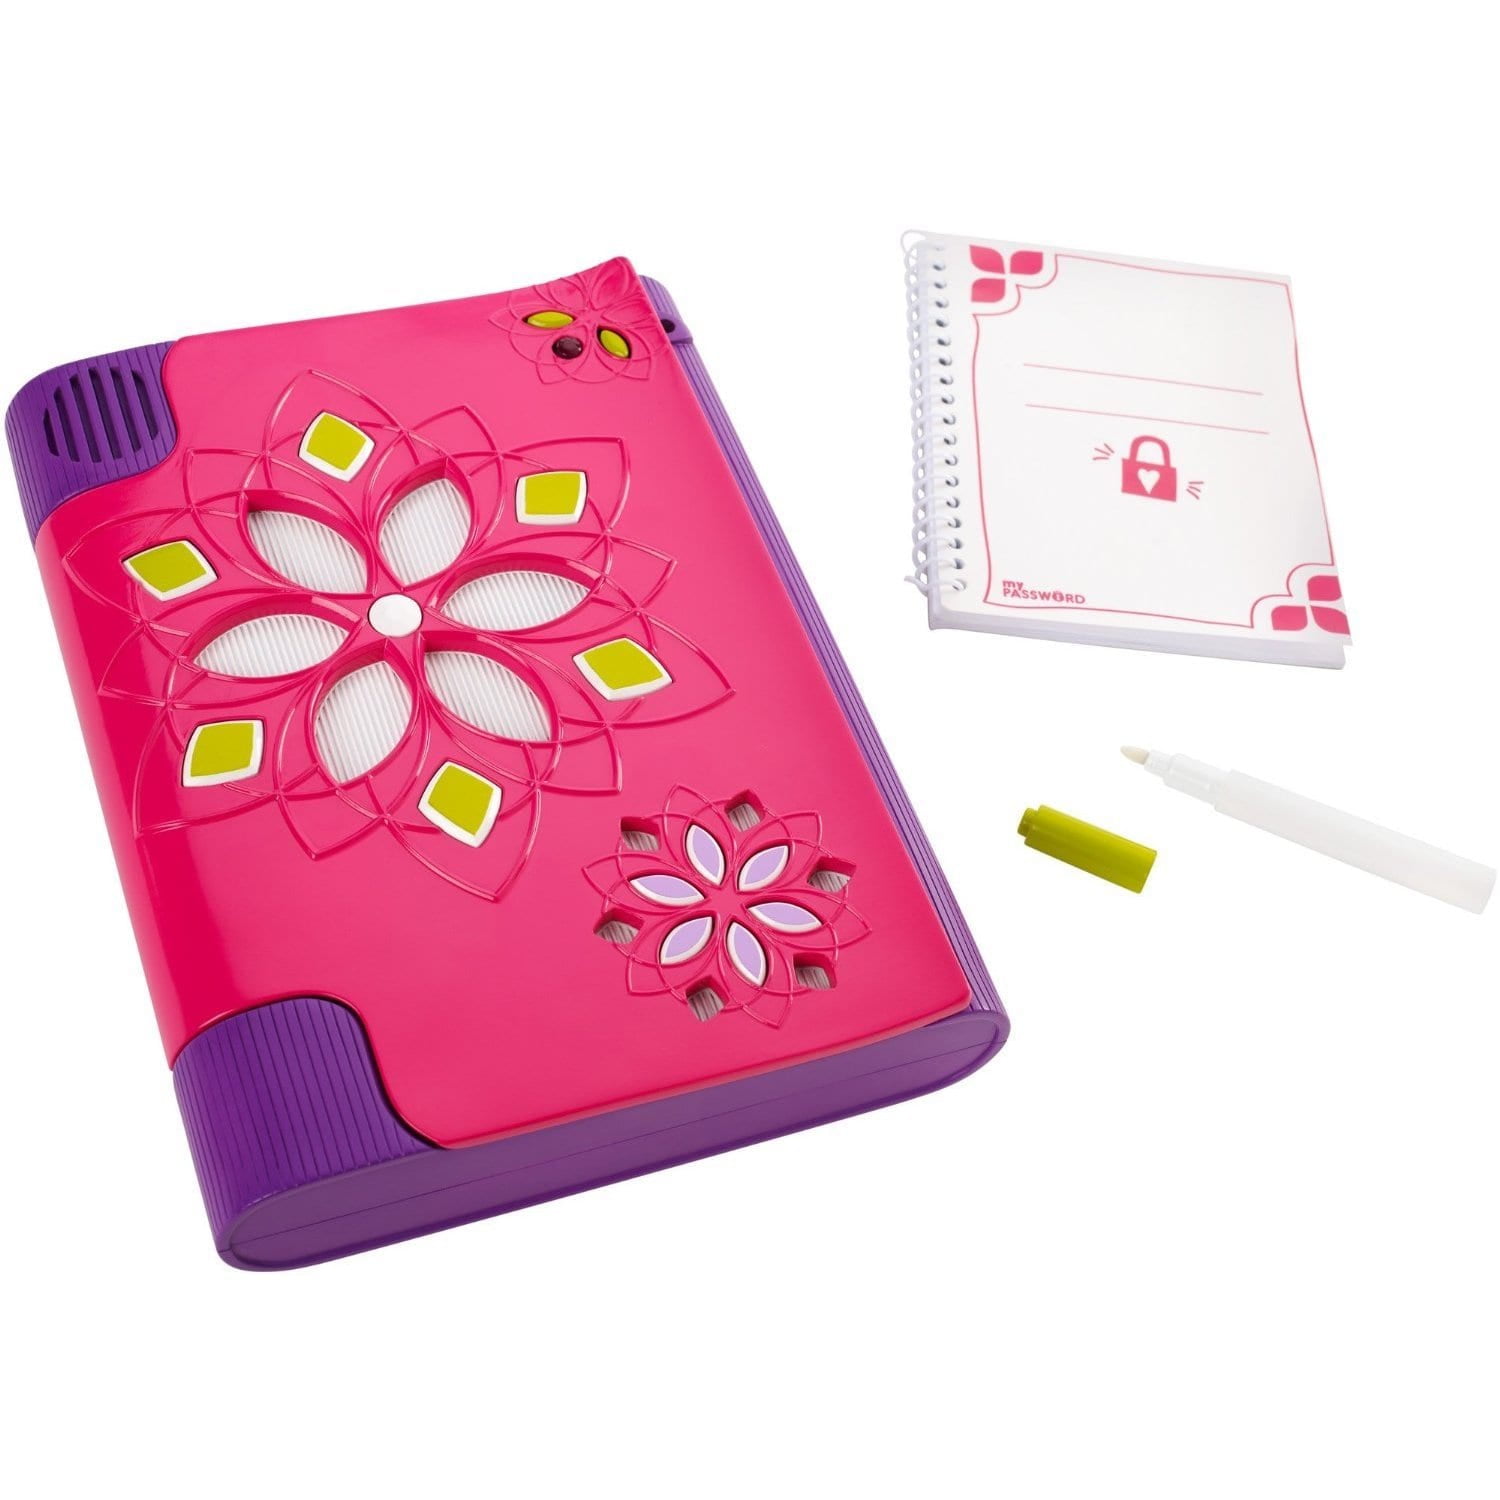 Girl Tech Voice Recognition Password Journal  your voice protects it  Sealed